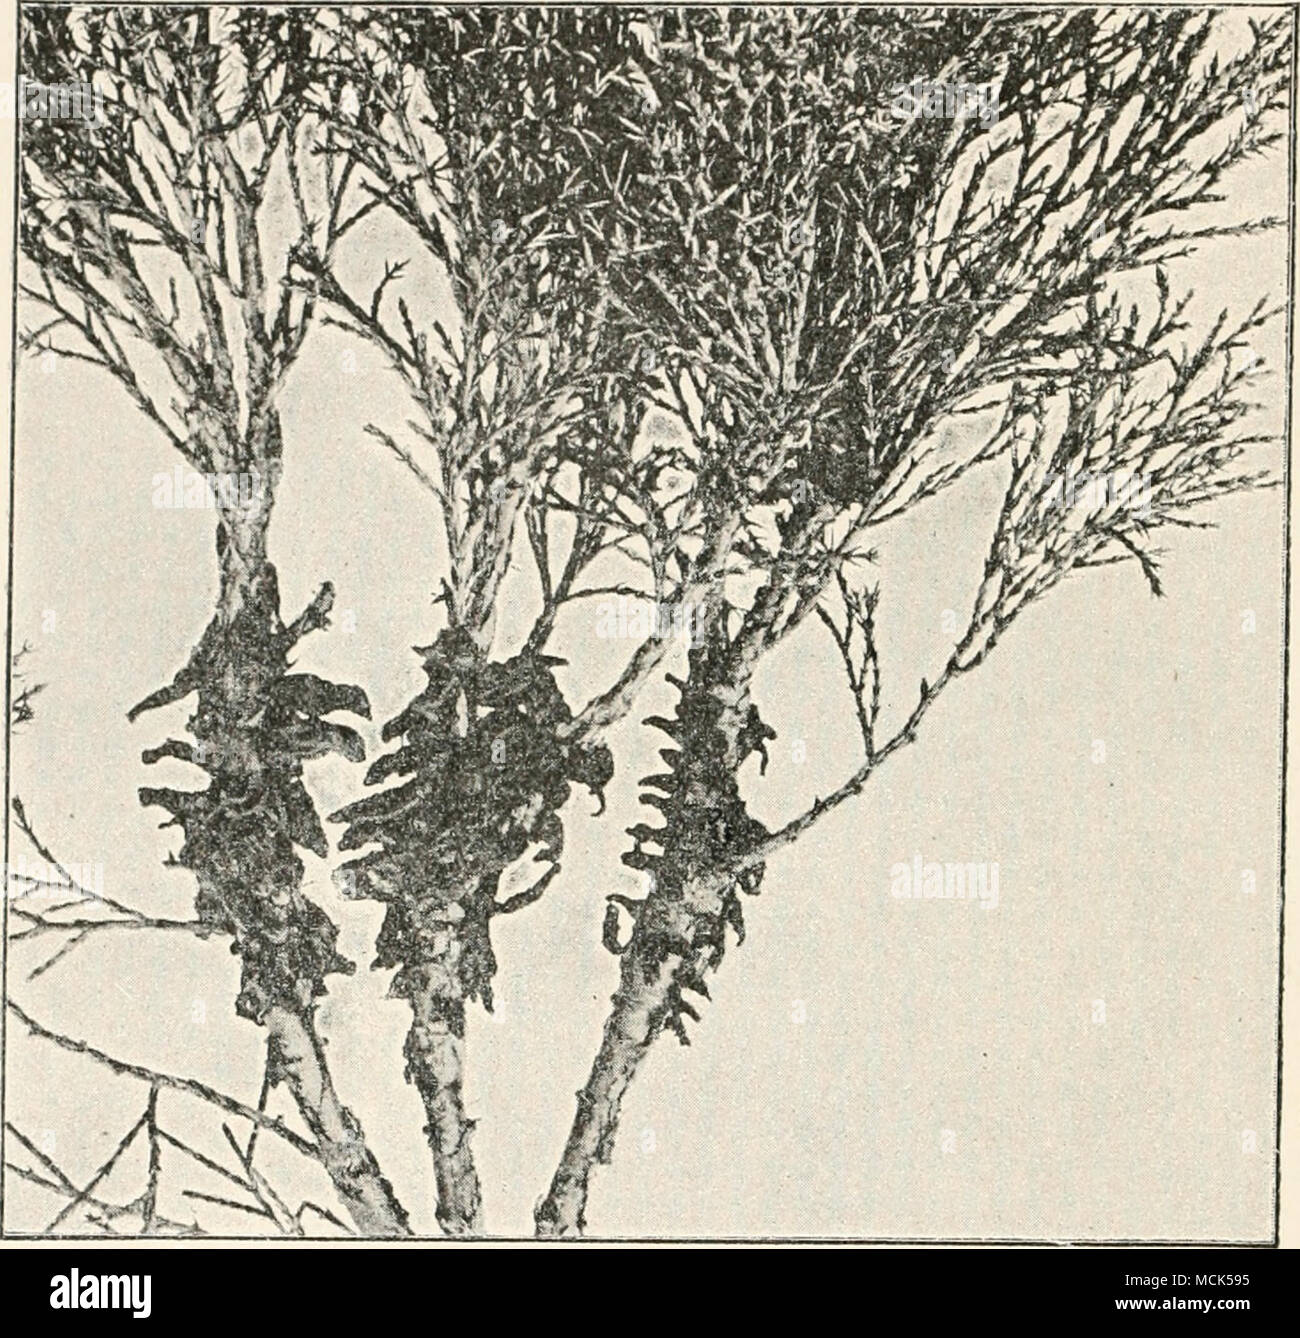 . Fig. 230.—Gymnosporanciium xabinae on twigs of Juaifii ras Suhinn, at the time of liberation of spores, (v. Tubeuf phot.) twigs and scale-leaves. These bodies absorb water, swell, and run together, forming transparent gelatinous masses (Figs. 230 and 231). The teleutospores resemble those of G. juniperinum, but have only four germ-pores; they germinate on the gelatinous masses, and produce promycelia and sporidia. The latter germinate at once, chiefly on leaves of Pyrus com- munis. The pycnidia are produced on the upper epidermis as sticky yellow spots bearing darker dot-like pycnidia. The a Stock Photo